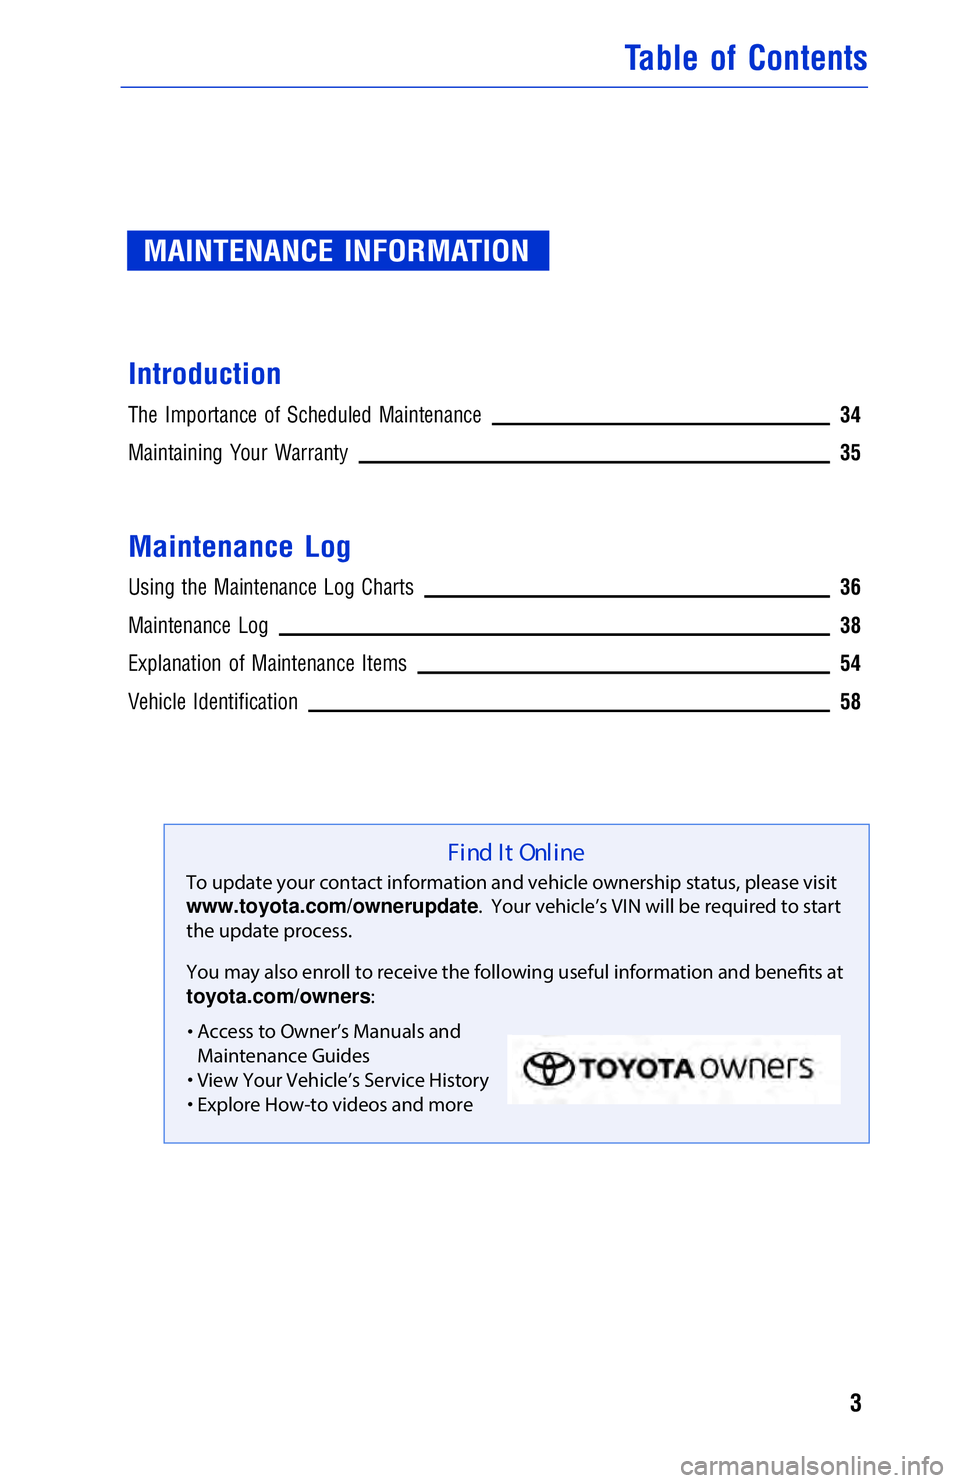 TOYOTA AVALON 2018  Warranties & Maintenance Guides (in English) JOBNAME: 2878002-en-2018_AVAL PAGE: 3 SESS: 4 OUTPUT: Fri May 5 09:22:06 2017
/InfoShareAuthorCODA/InfoShareAuthorCODA/TS_Warr_Maint/2878002-en-2018_A\
VALON.00505-18WMG-AVA/TS_Warr_Maint_v1
MAINTENAN